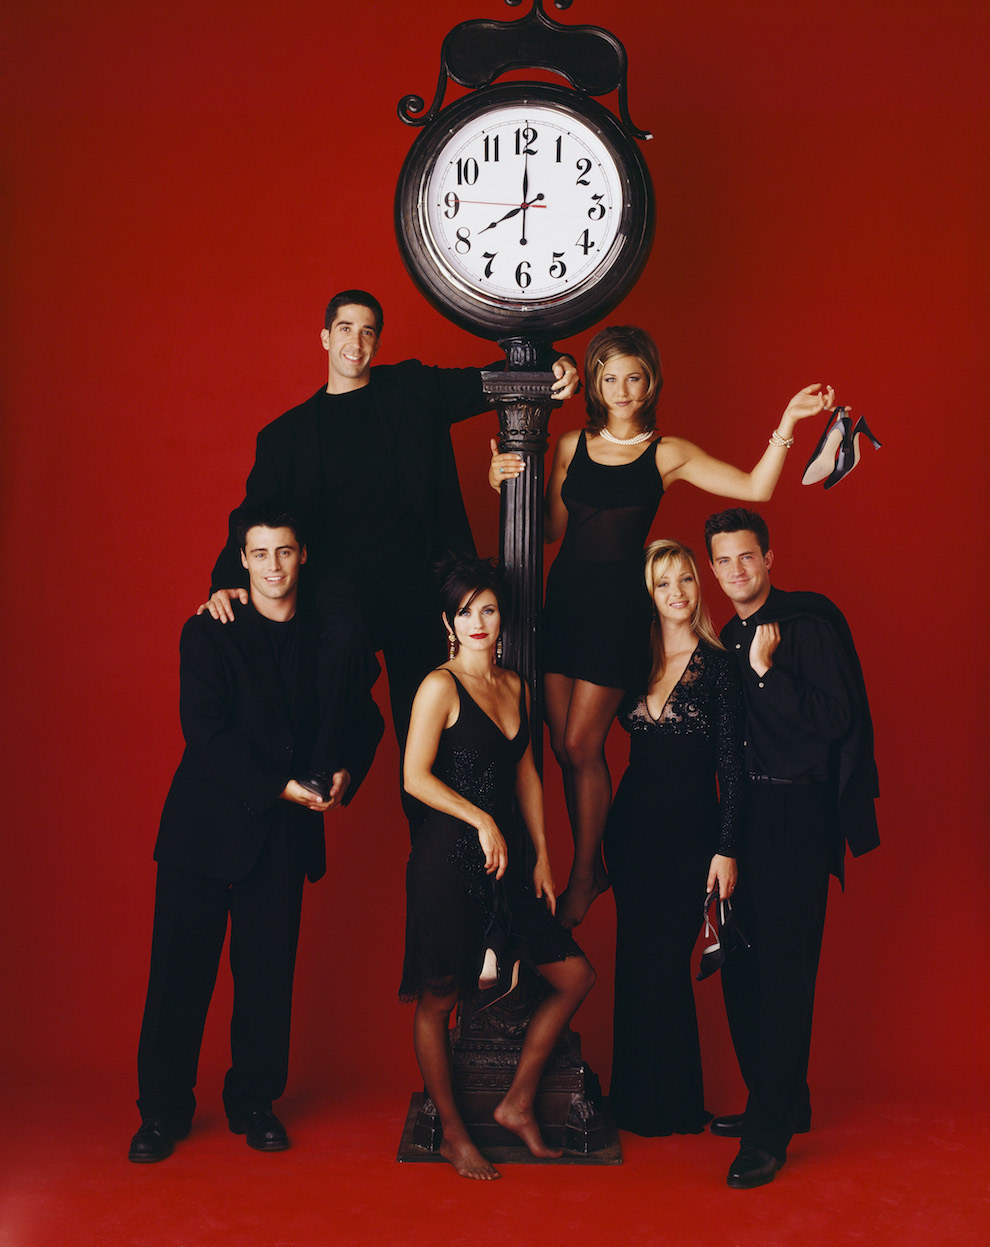 27 Rare Photos Of The Cast Of Friends That Will Make You